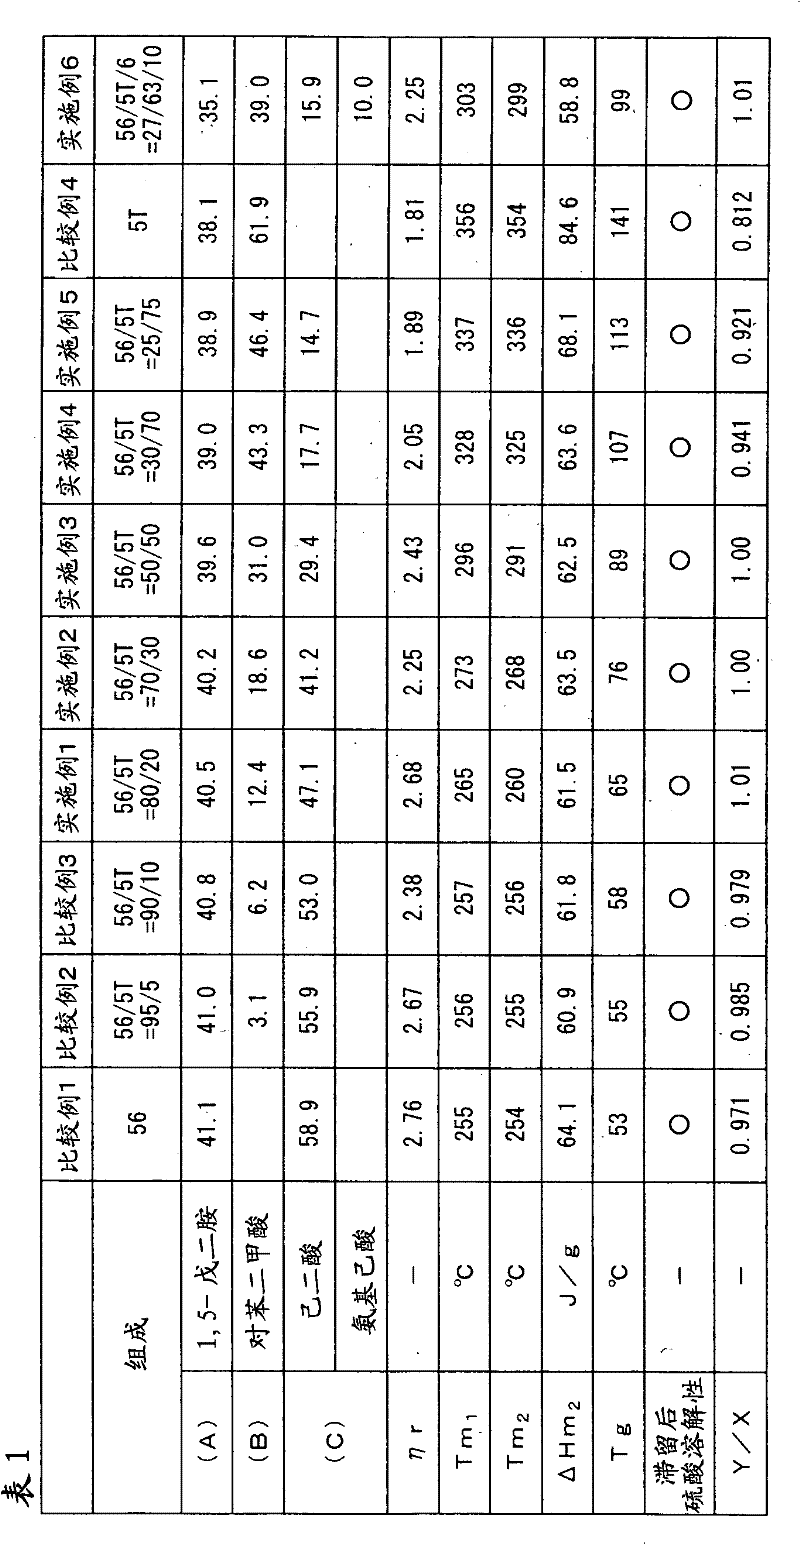 Polyamide resin, composition containing polyamide resin, and molded articles of polyamide resin and composition